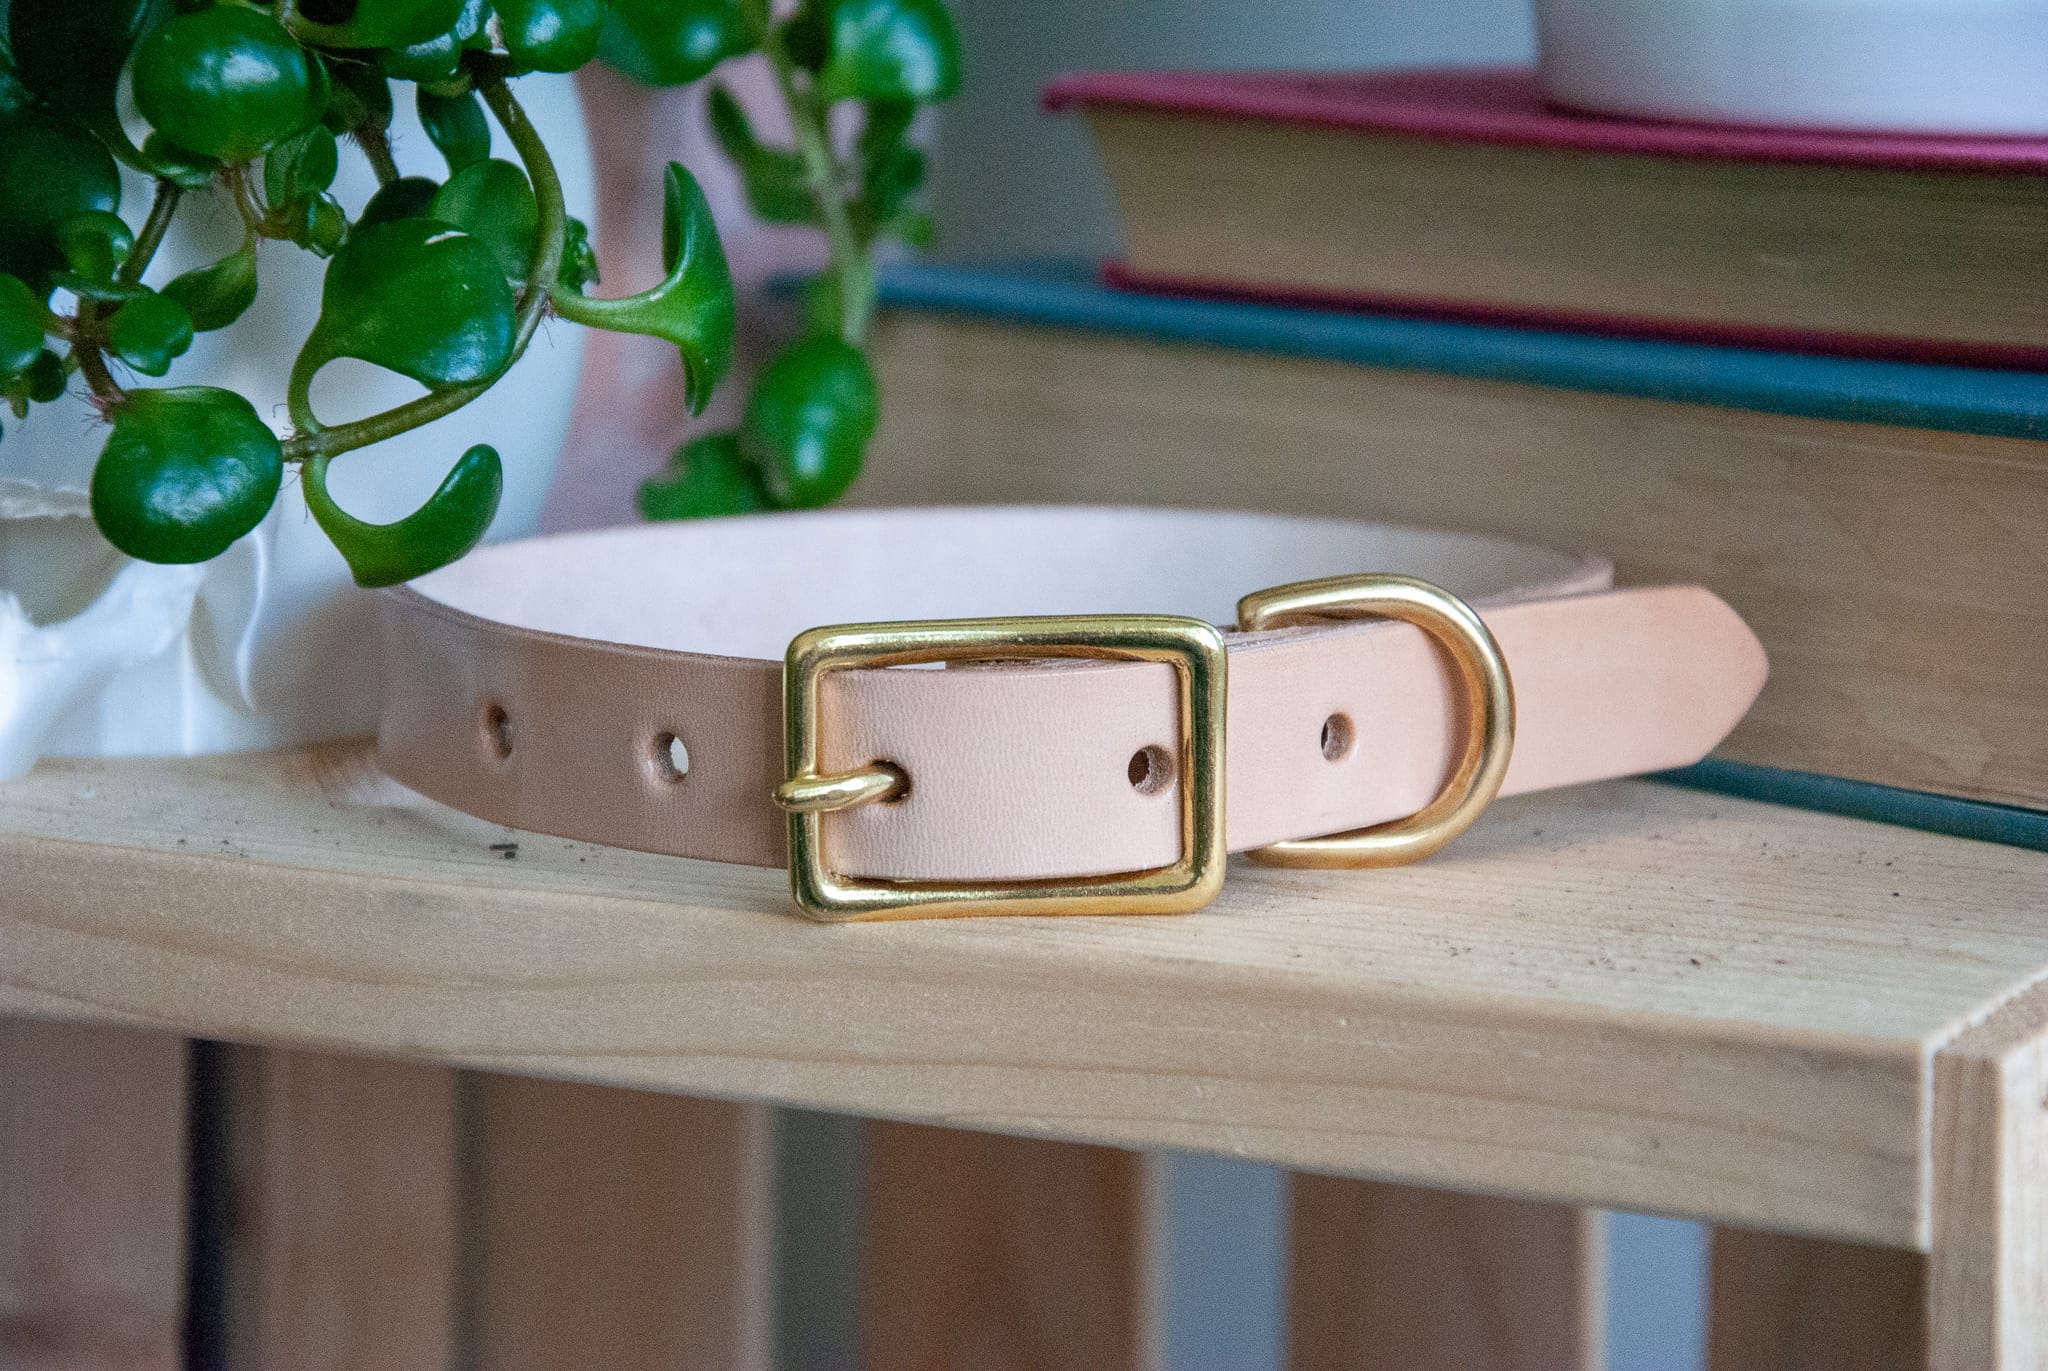 natural vegetable tanned leather dog collar with brass hardware on a wooden crate with books and plants in the background